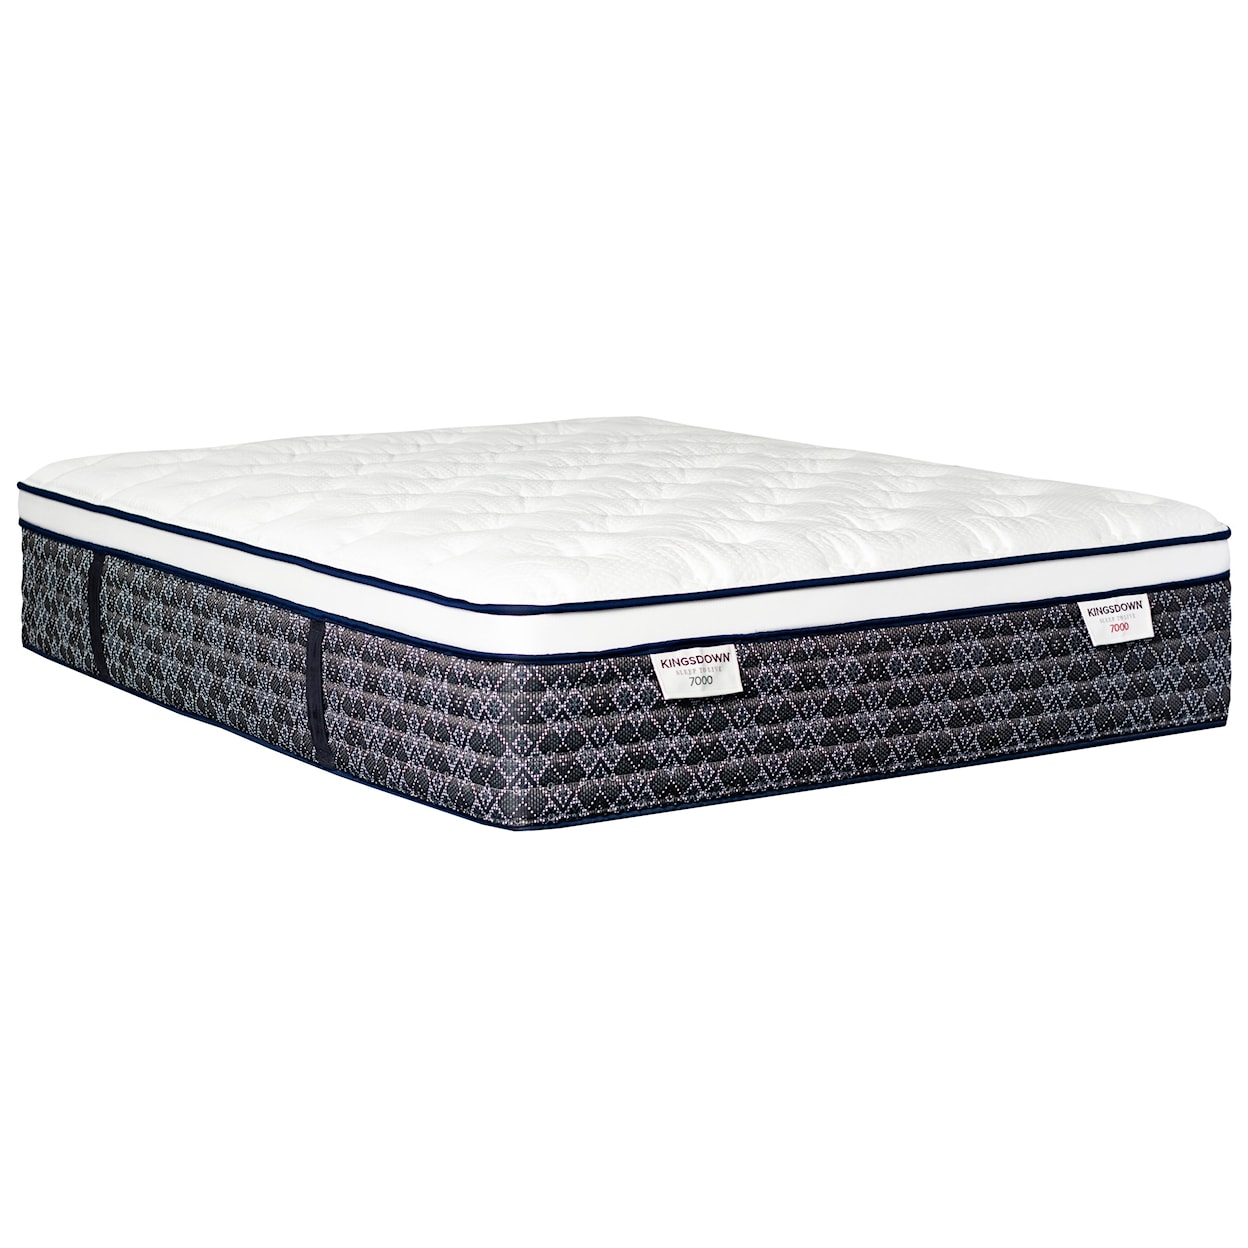 Kingsdown Sleep to Live 7000 Gold Blue ET Twin Pocketed Coil Mattress